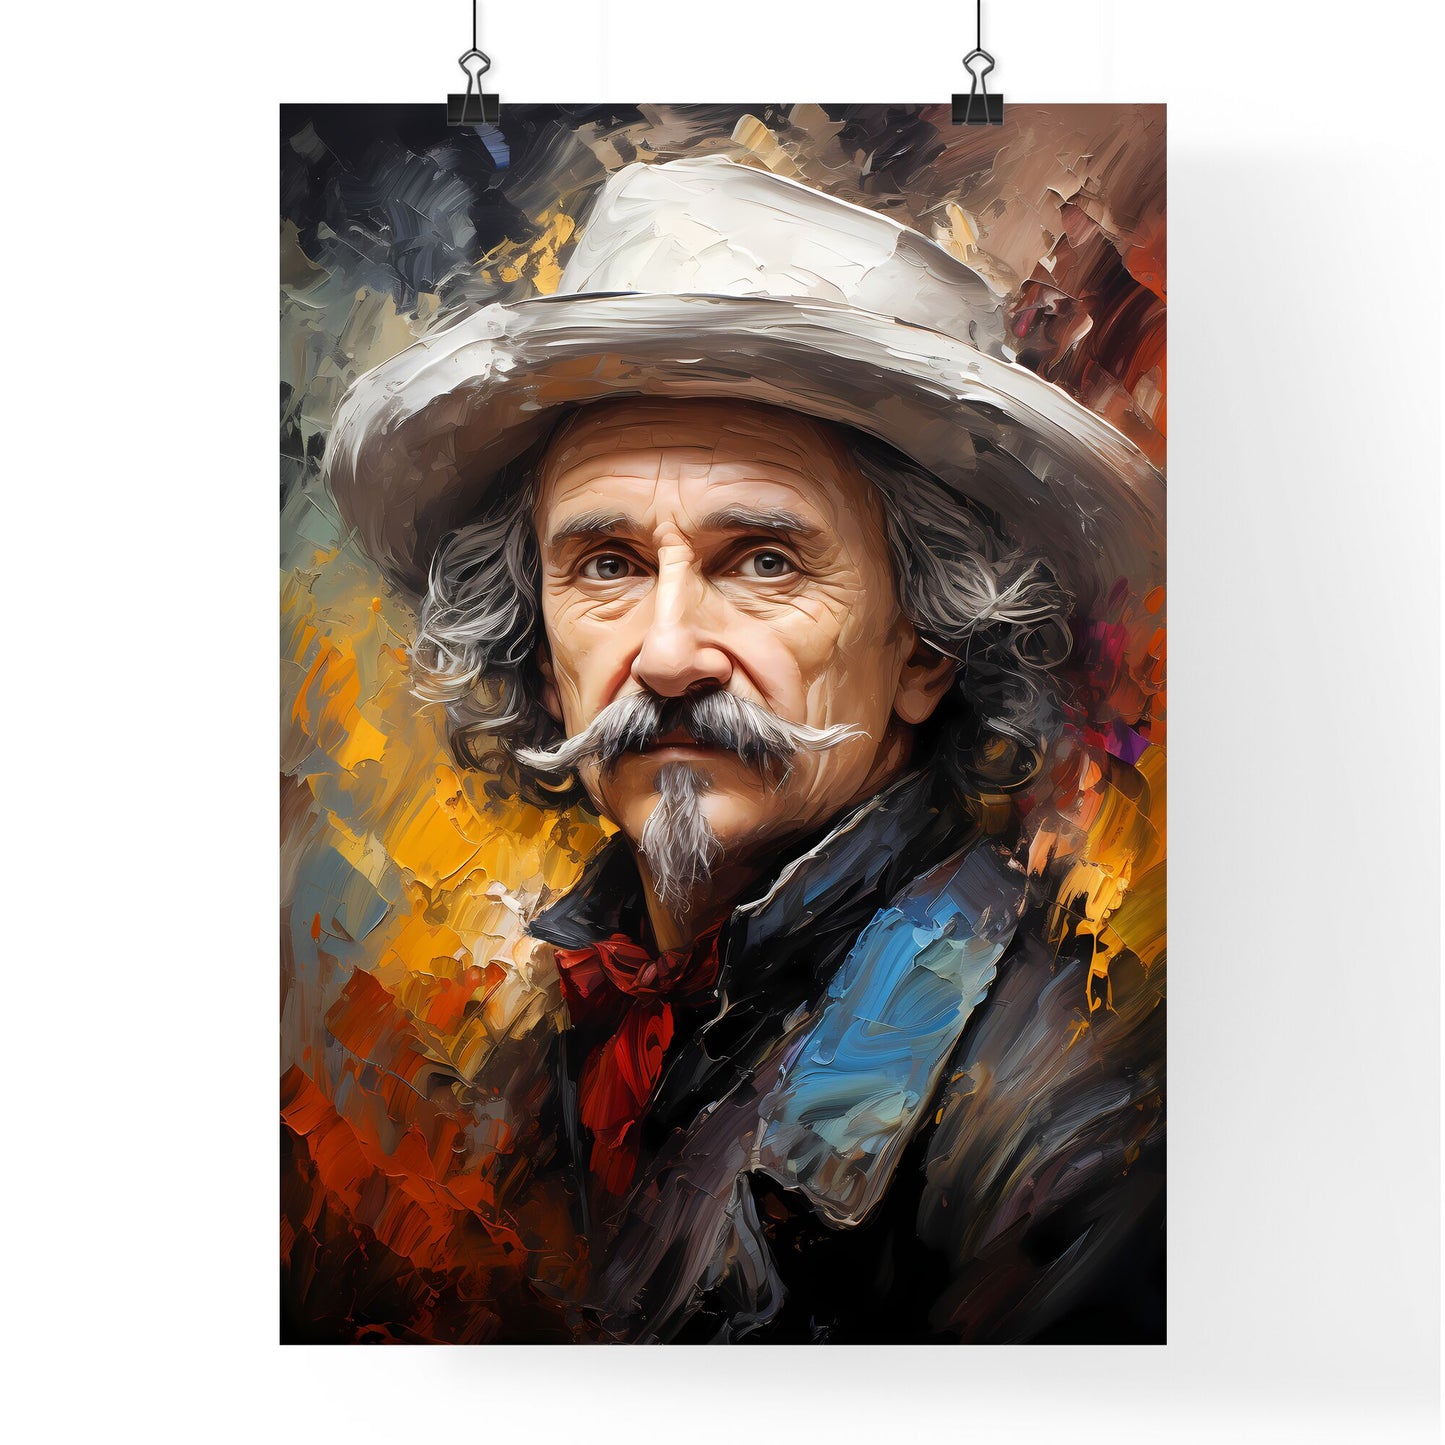 Rembrandt - A Painting Of A Man With A Mustache And A Hat Default Title